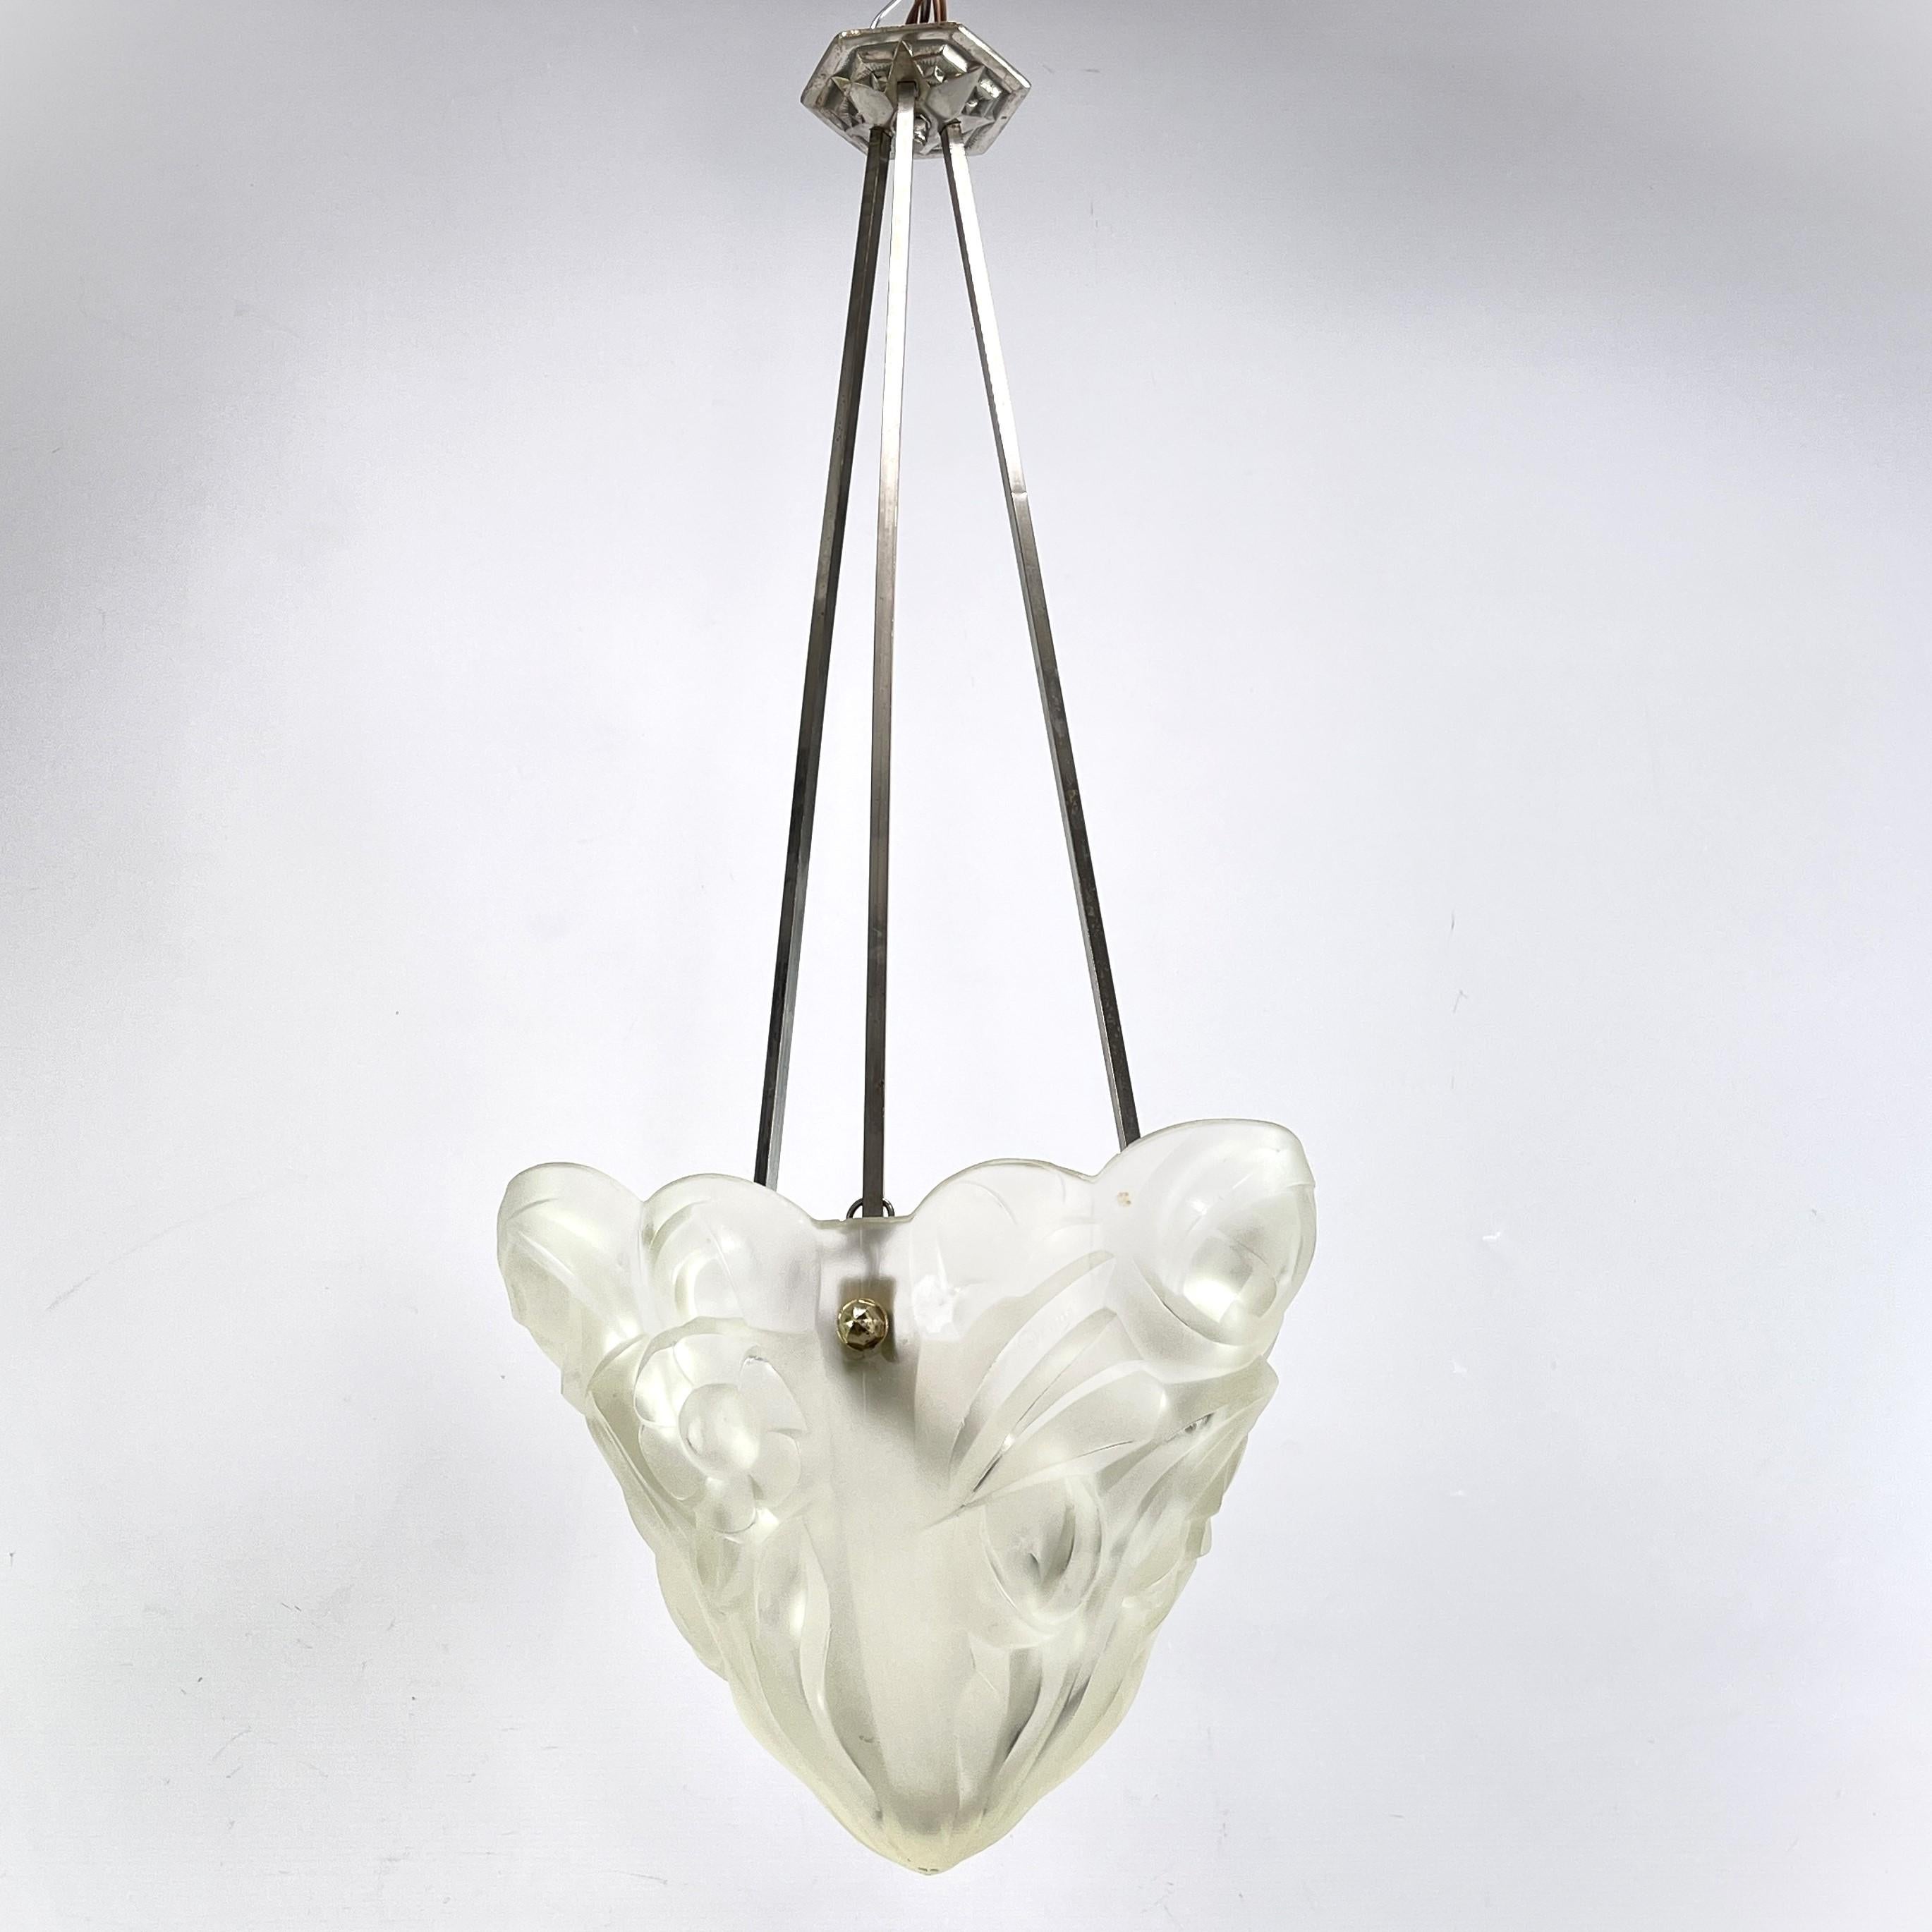 French Art Deco Chandelier Hanging Lamp by Dégue, 1930s For Sale